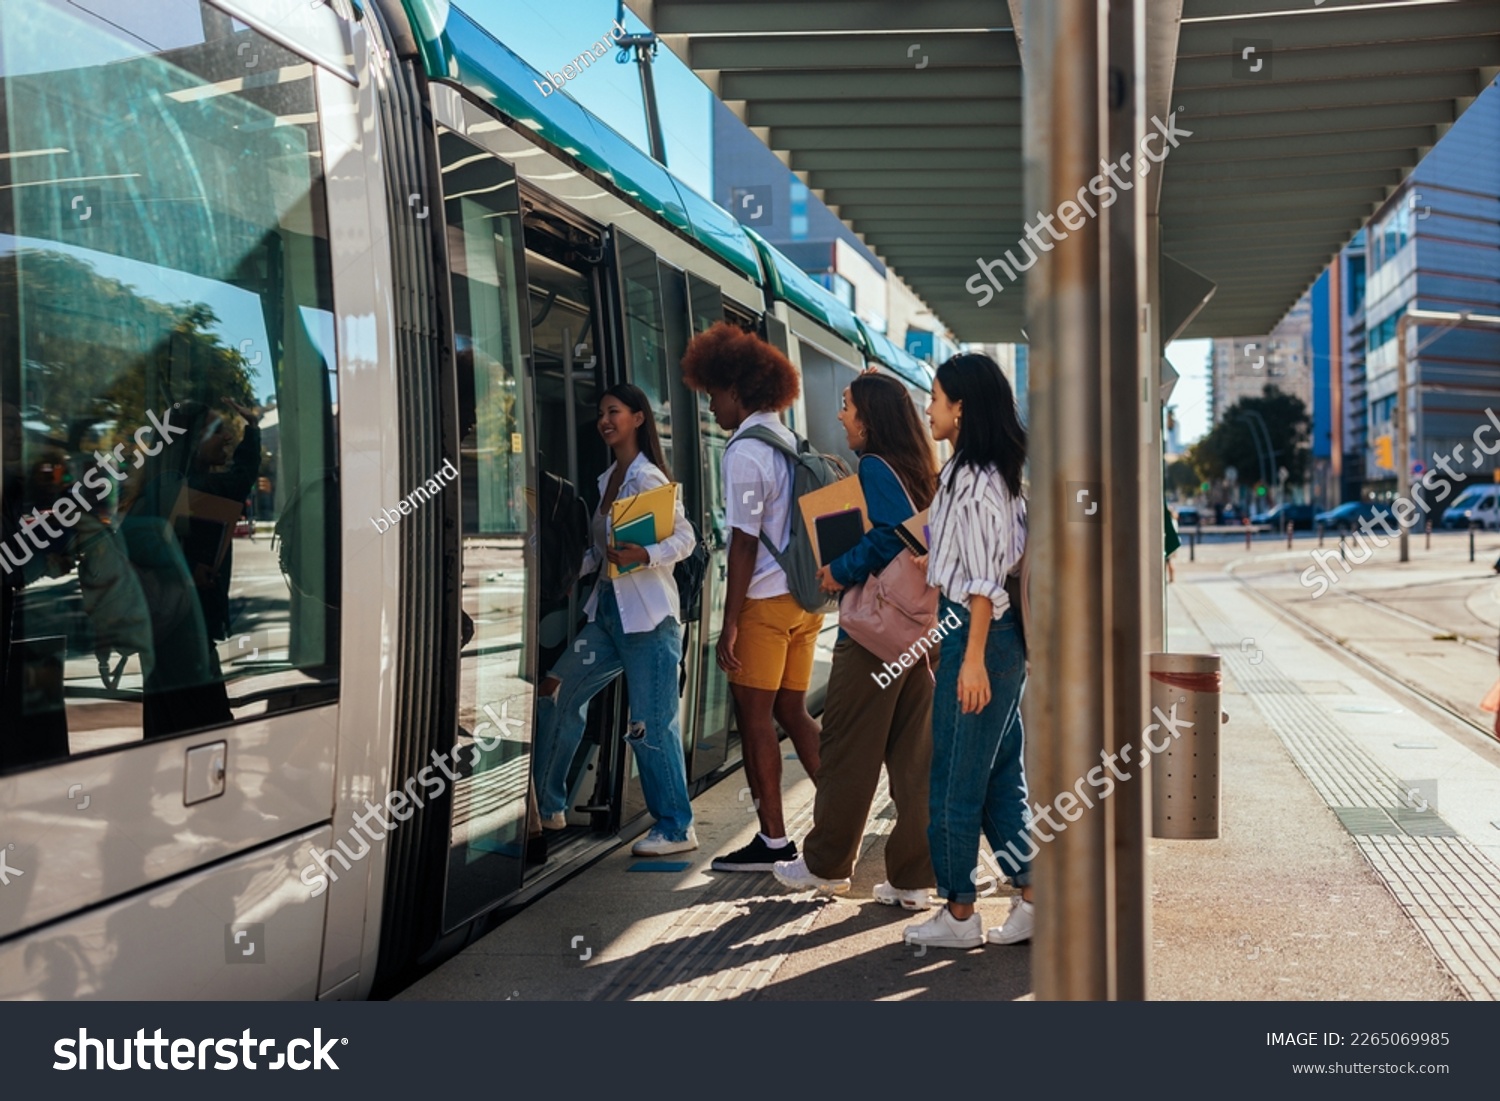 A group of university students going home after classes at school are entering the public transportation train. #2265069985